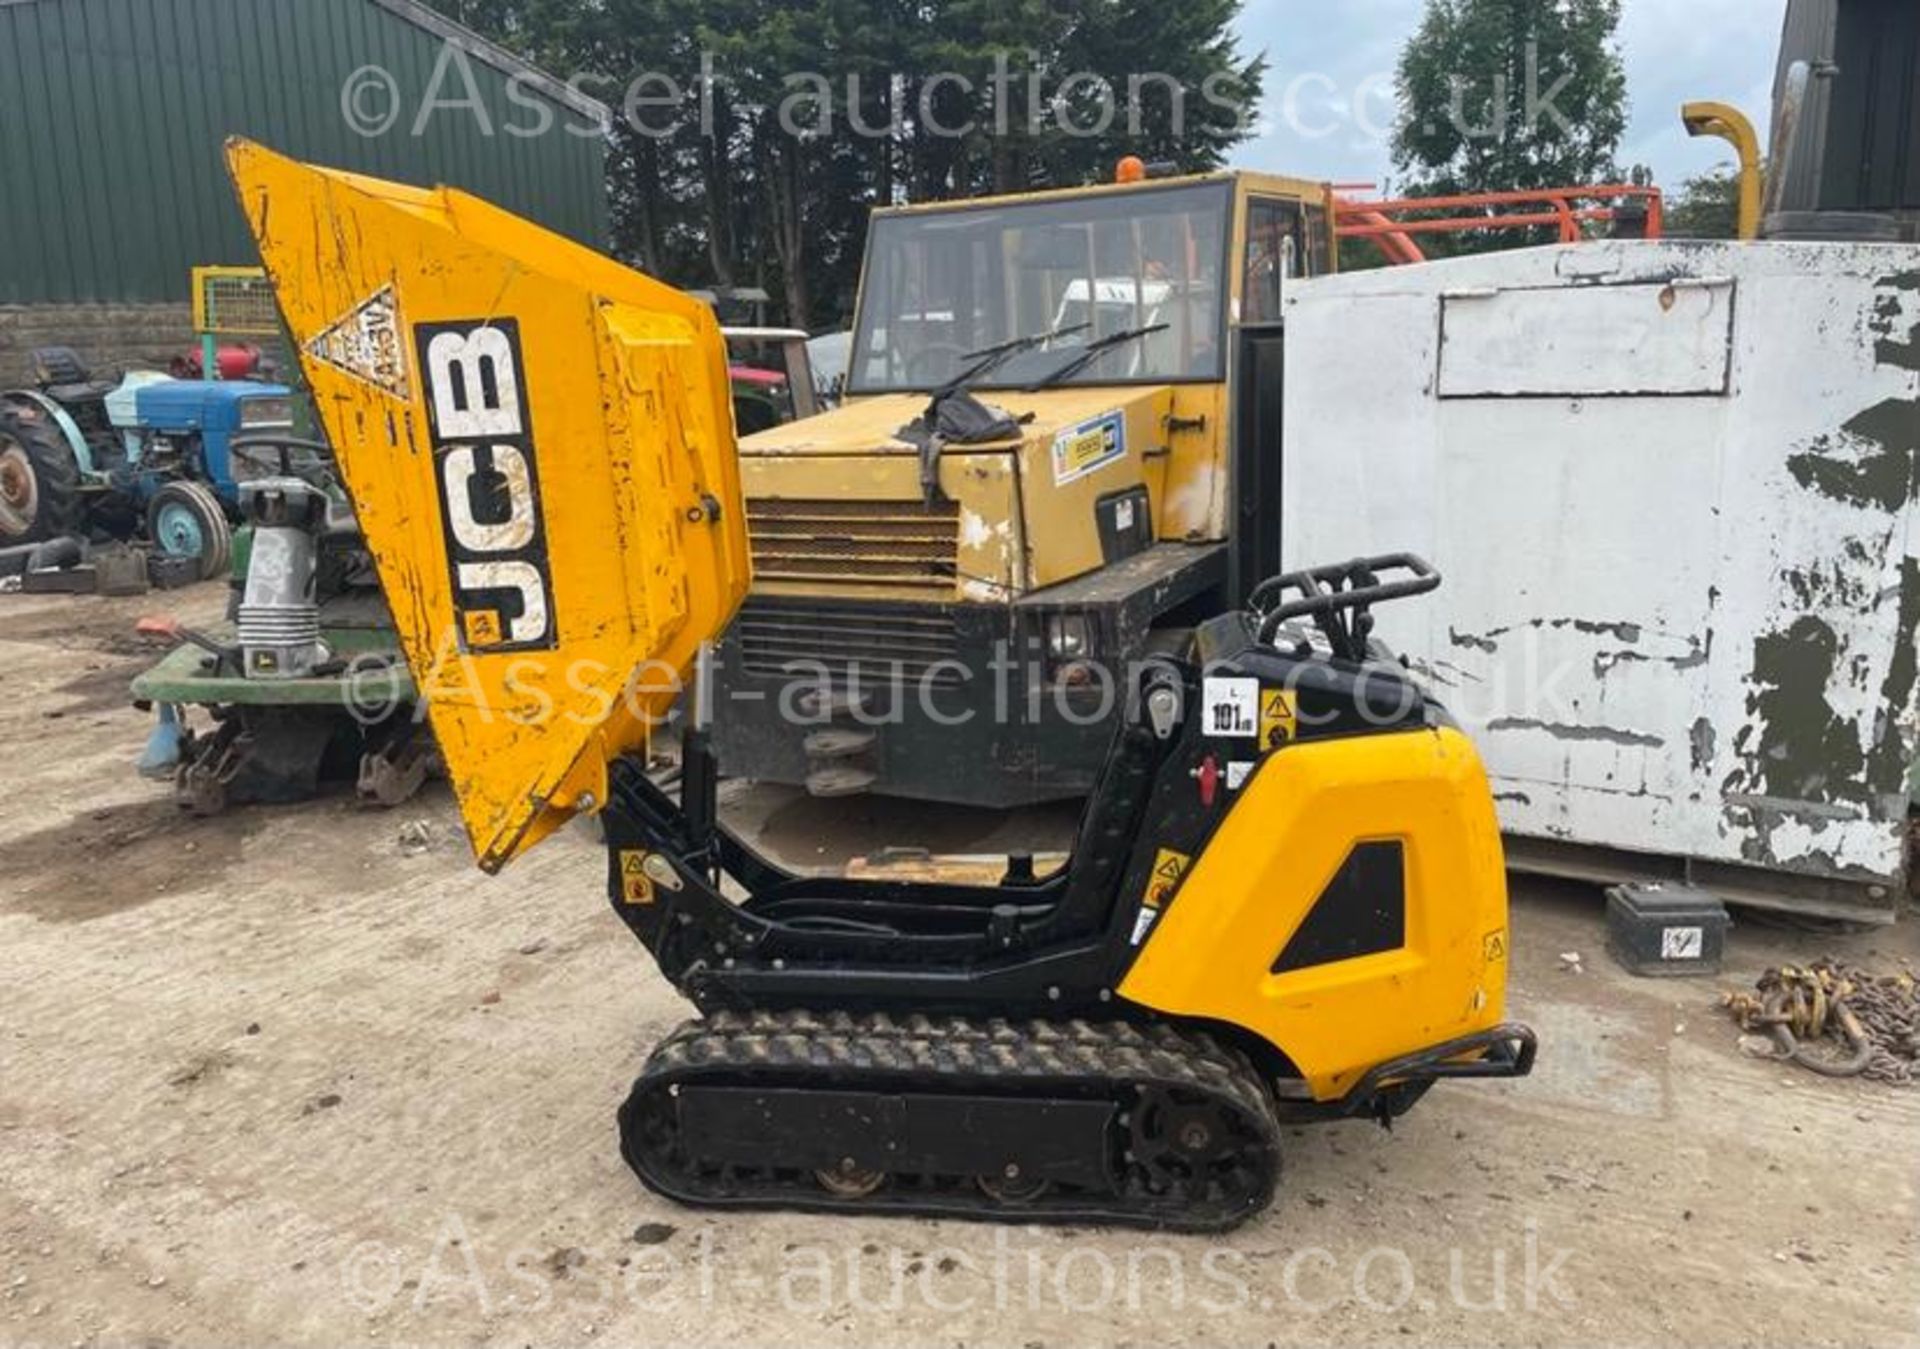 2019 JCB HTD-5 DIESEL TRACKED DUMPER, RUNS DRIVES AND WORKS WELL, ELECTRIC OR PULL START *PLUS VAT* - Image 2 of 10